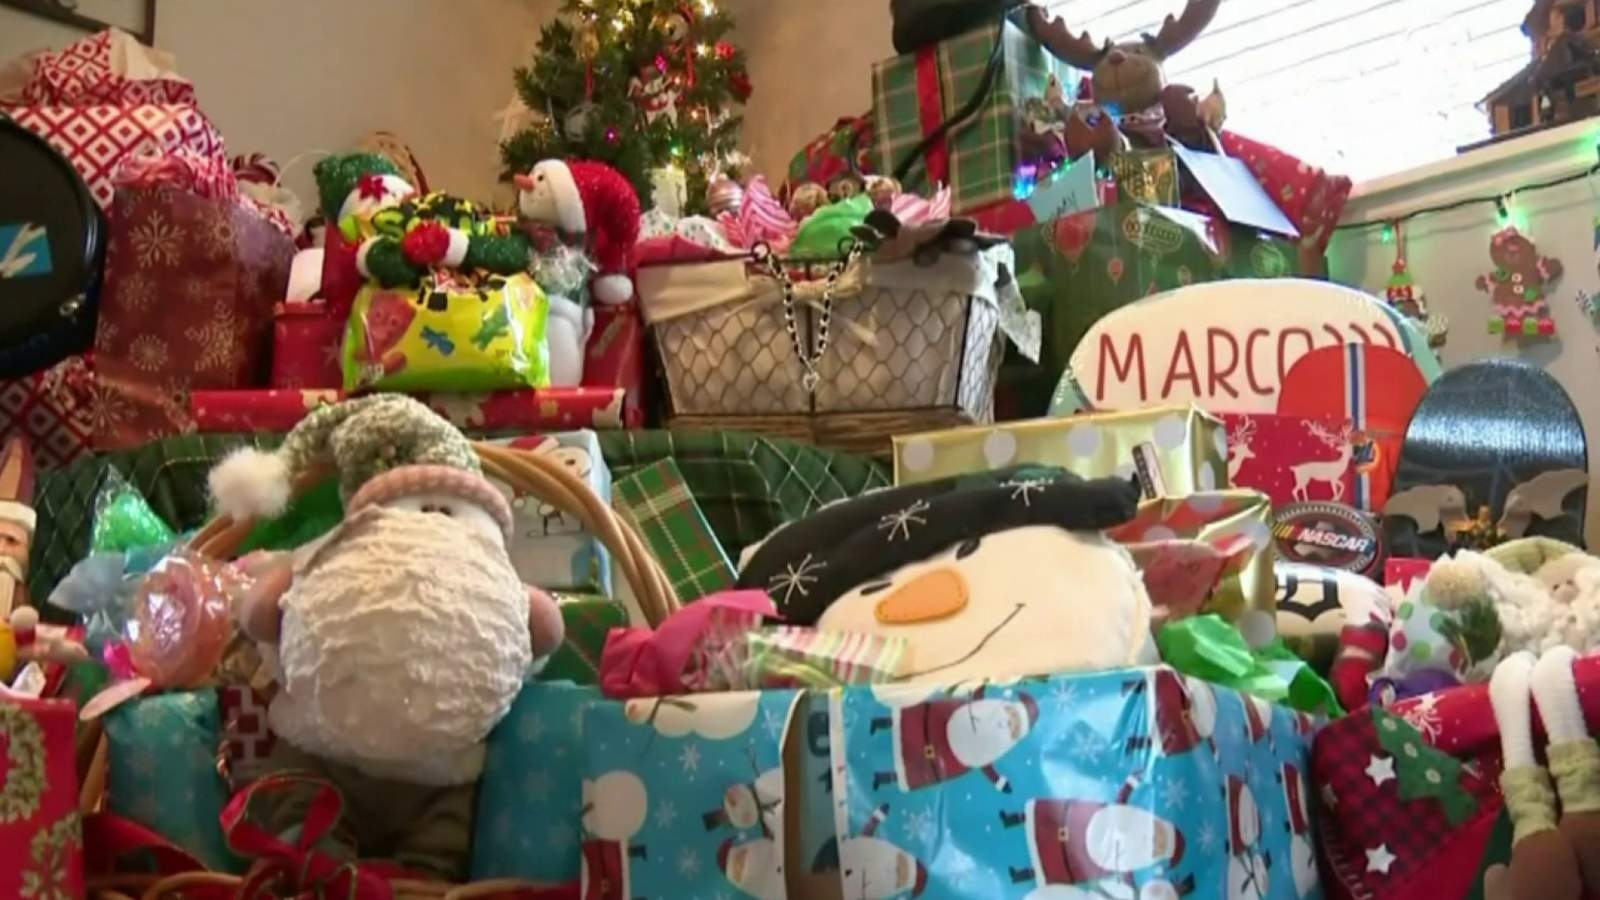 Clinton Township mother expands effort to give gifts to children in need during holiday season